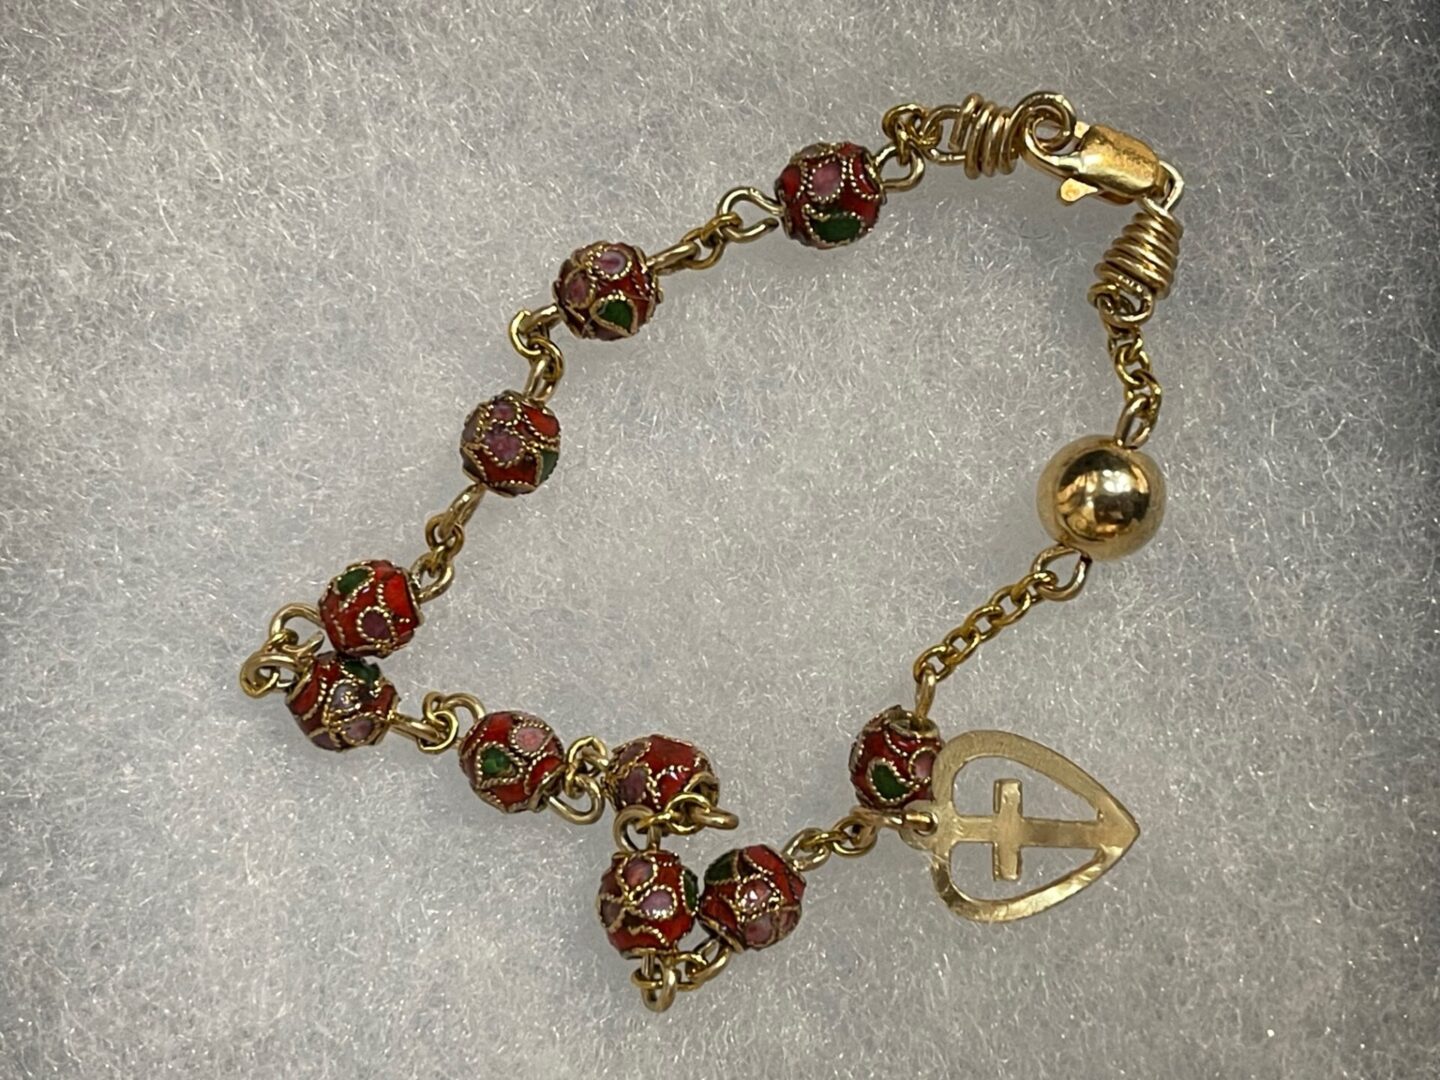 A gold plated bracelet with red and green beads.